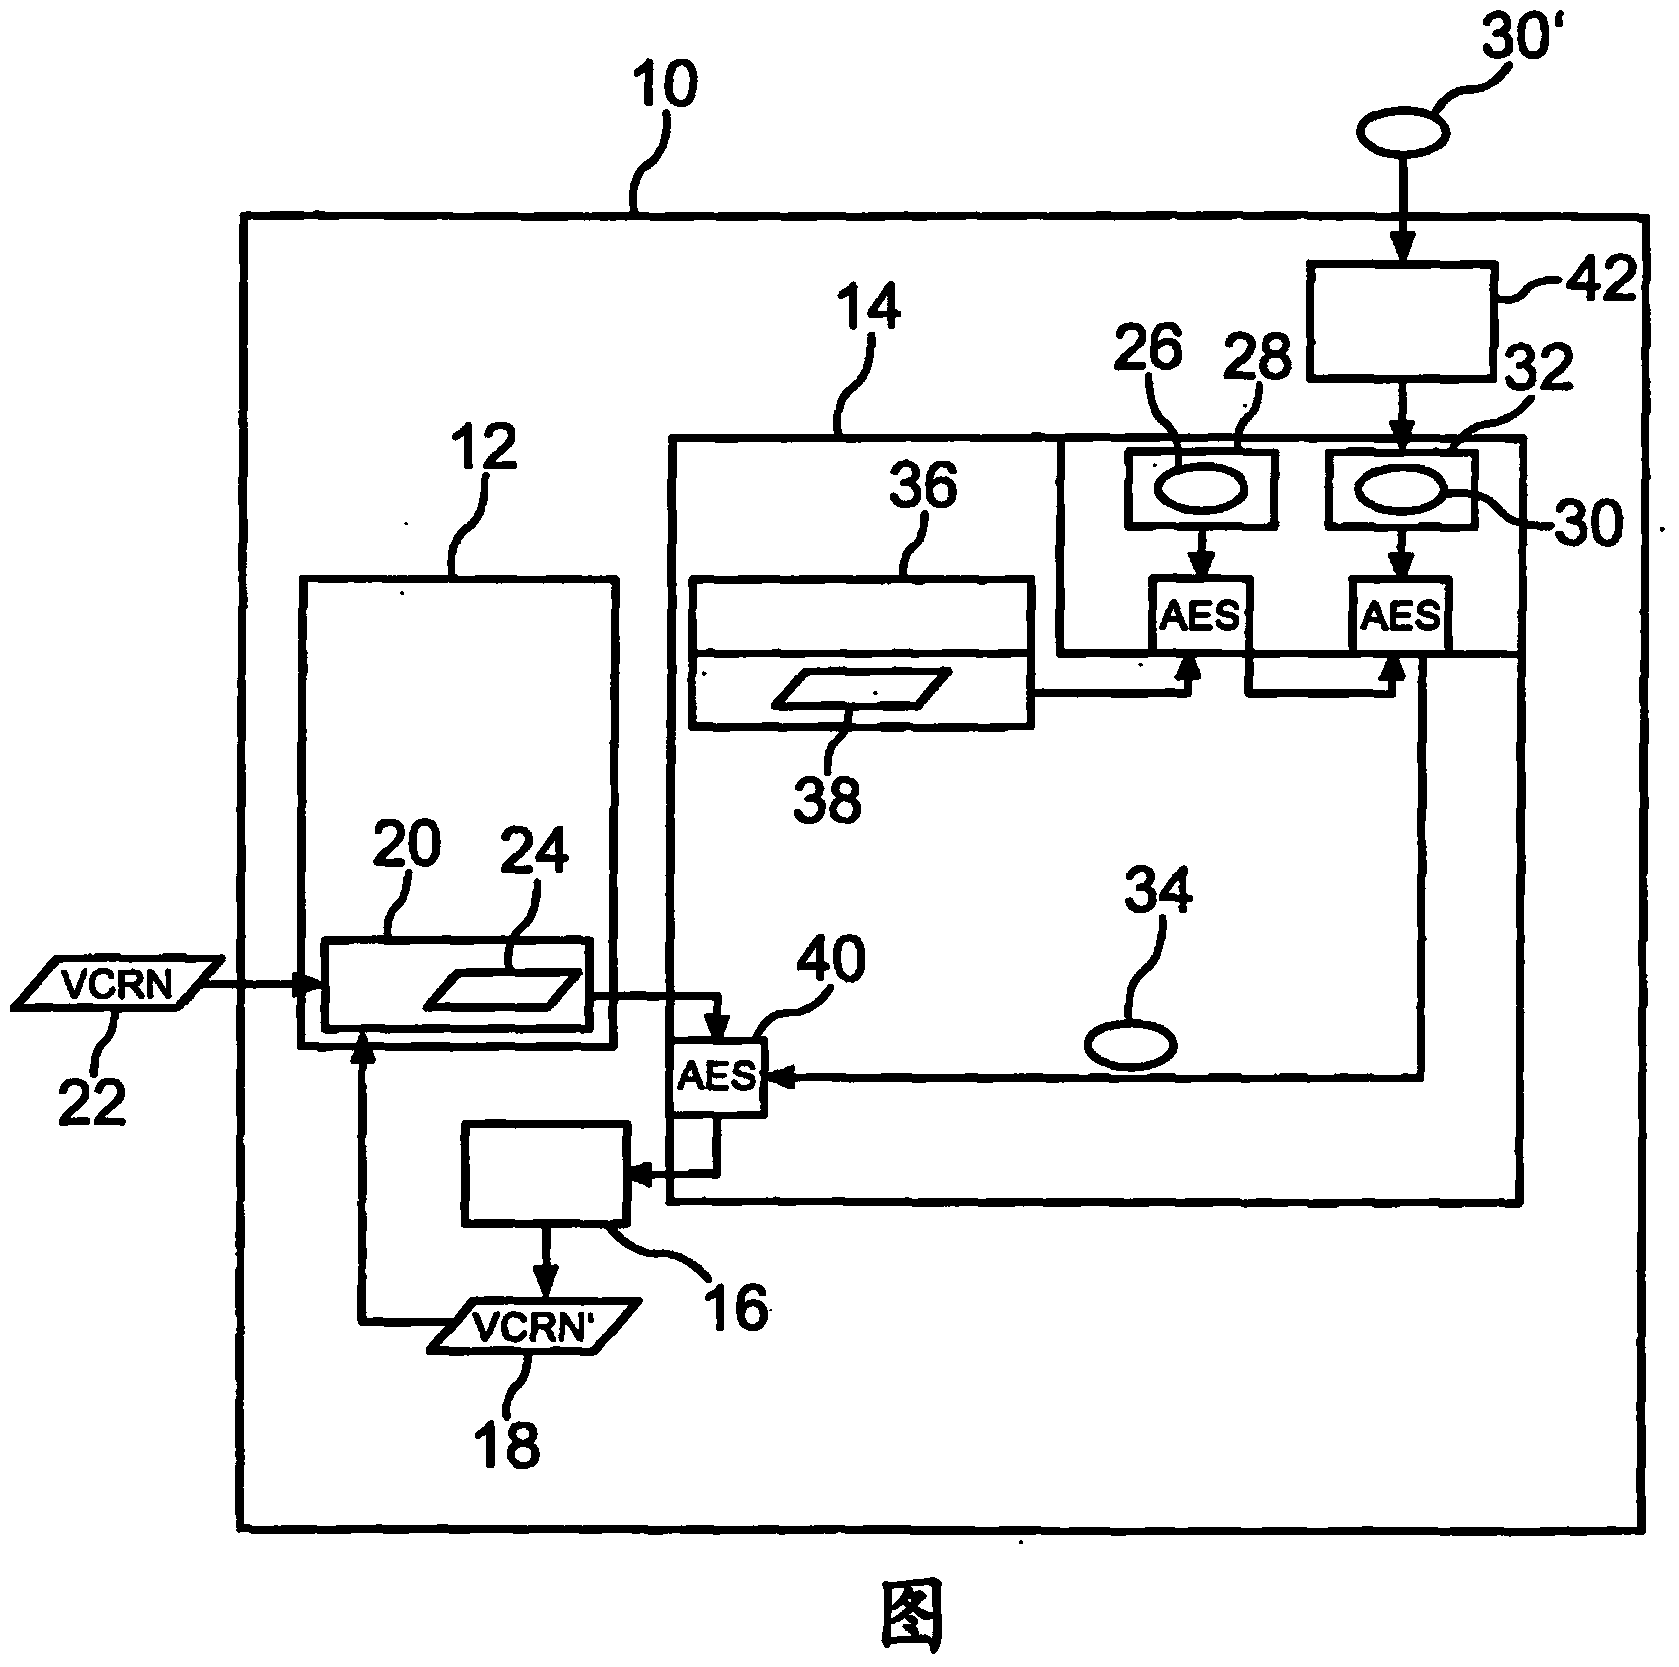 Motor vehicle control unit having a cryptographic device